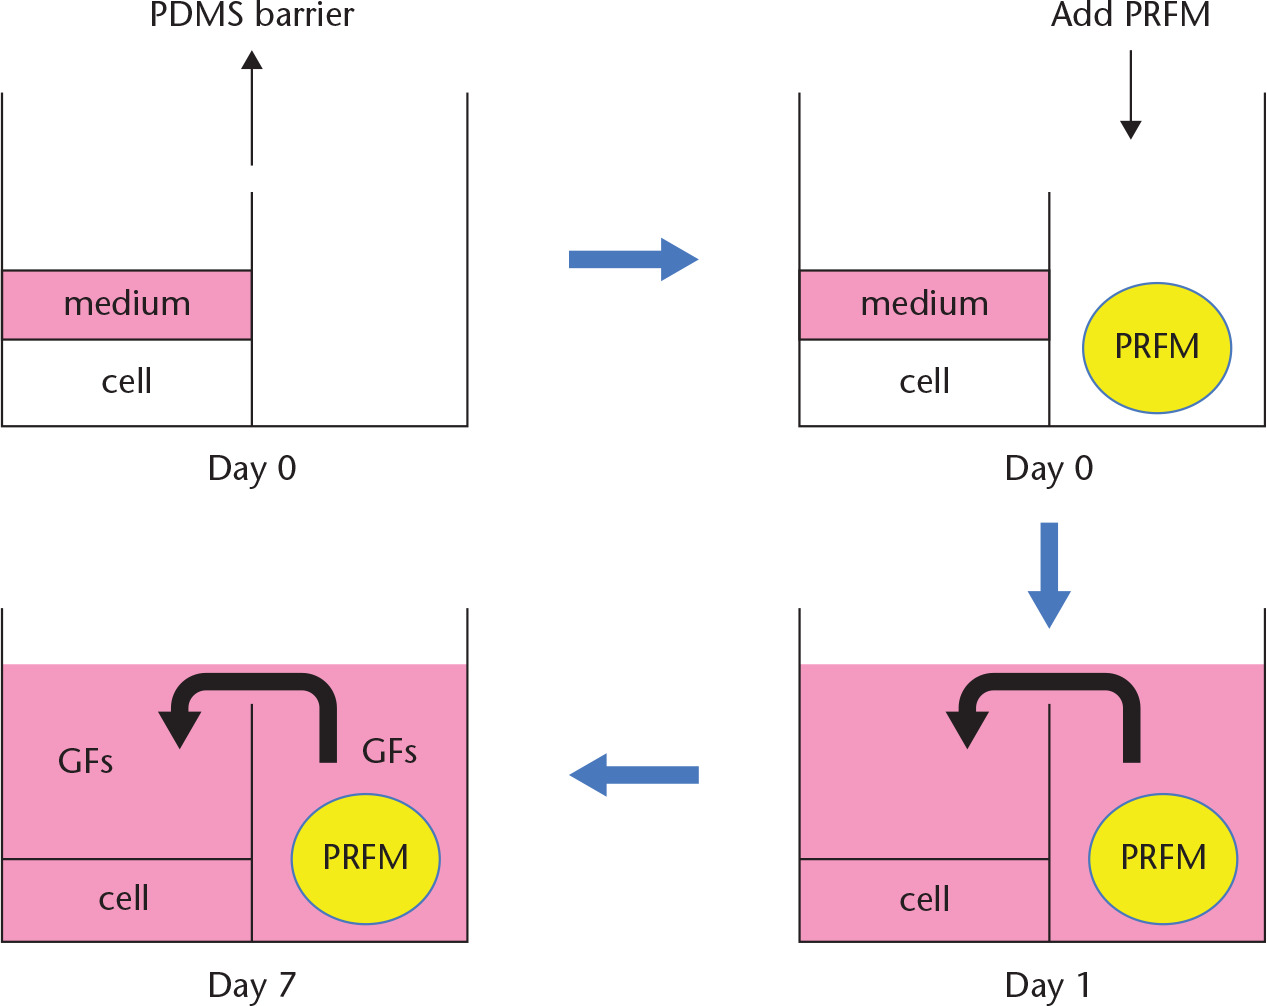 Fig. 1 
            The concept of a co-culture device to avoid the gelling effect. Top left) cell seeding in the cell chamber. Top right) platelet-rich fibrin matrix (PRFM) added into another chamber (PRFM chamber) without cell seeding. PRFM gelling may not affect the cell in the chamber because of the polydimethylsiloxane (PDMS) barrier. Bottom right) add culture medium into the PRFM chamber until it crosses over the PDMS barrier. Bottom left) growth factors in PRFM with lighter gravity dispersed in the culture medium are disseminated to the cell chamber to stimulate tenocyte proliferation. GF, growth factor.
          